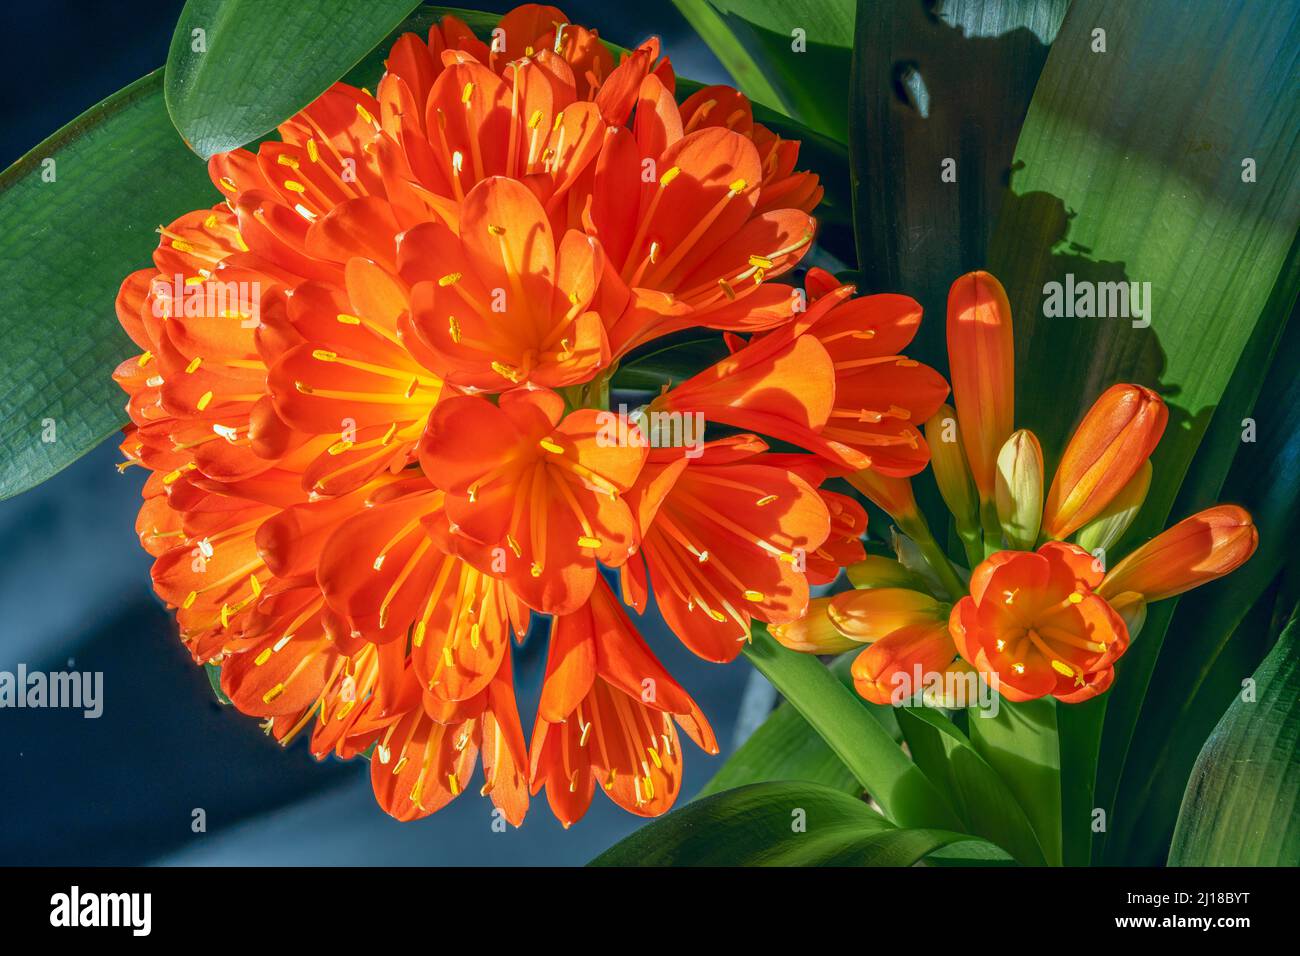 stuning Clivia Miniata bloom with bright orange petals and yellow stamens arranged in a cluster. Stock Photo